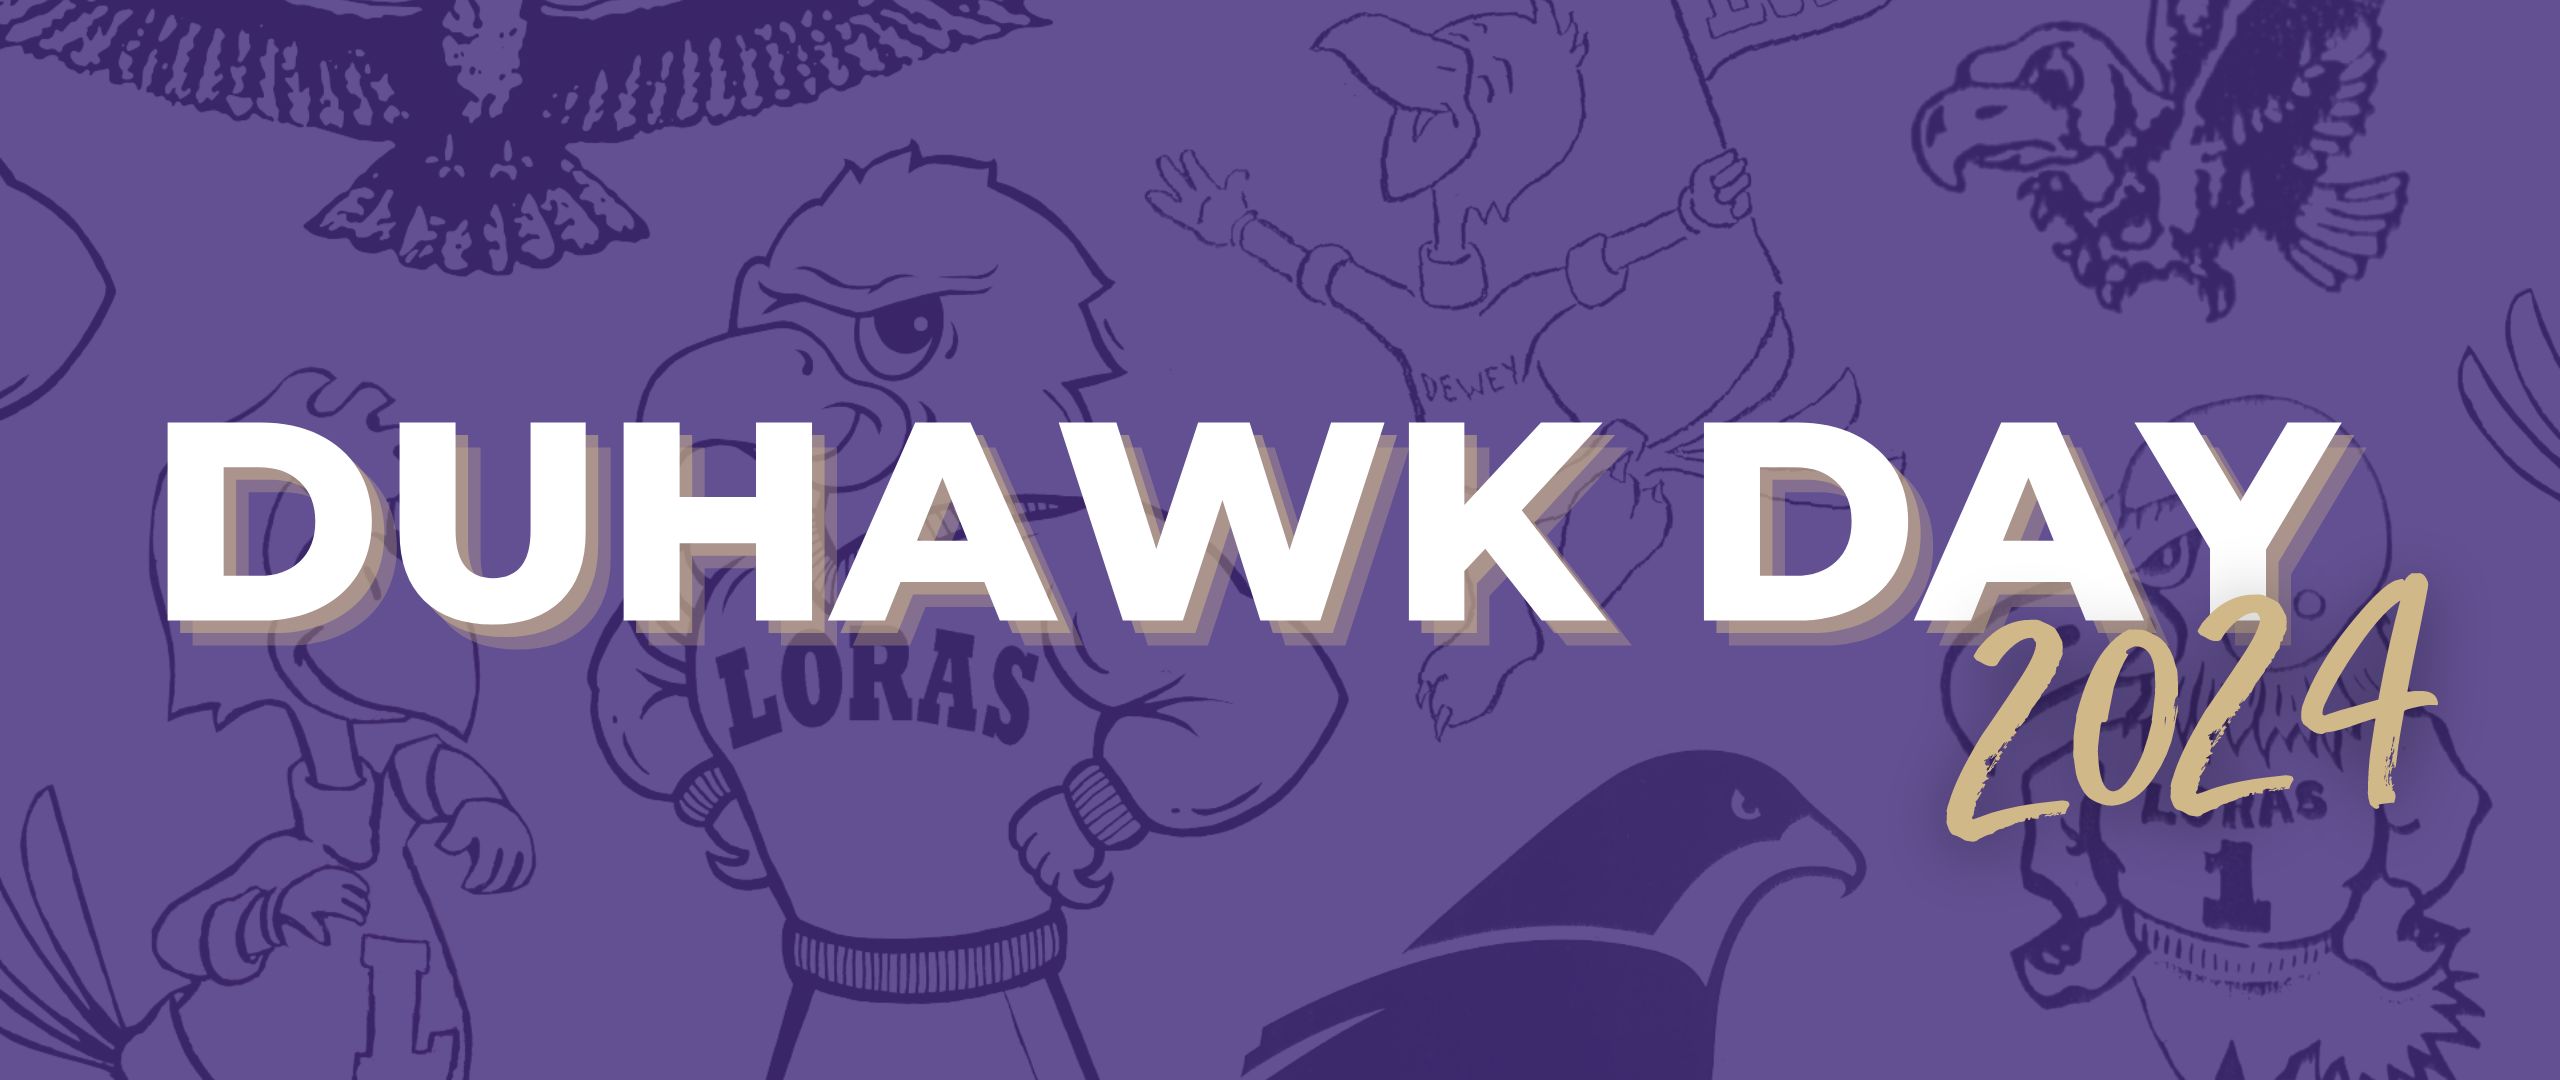 Duhawk Day with purple background